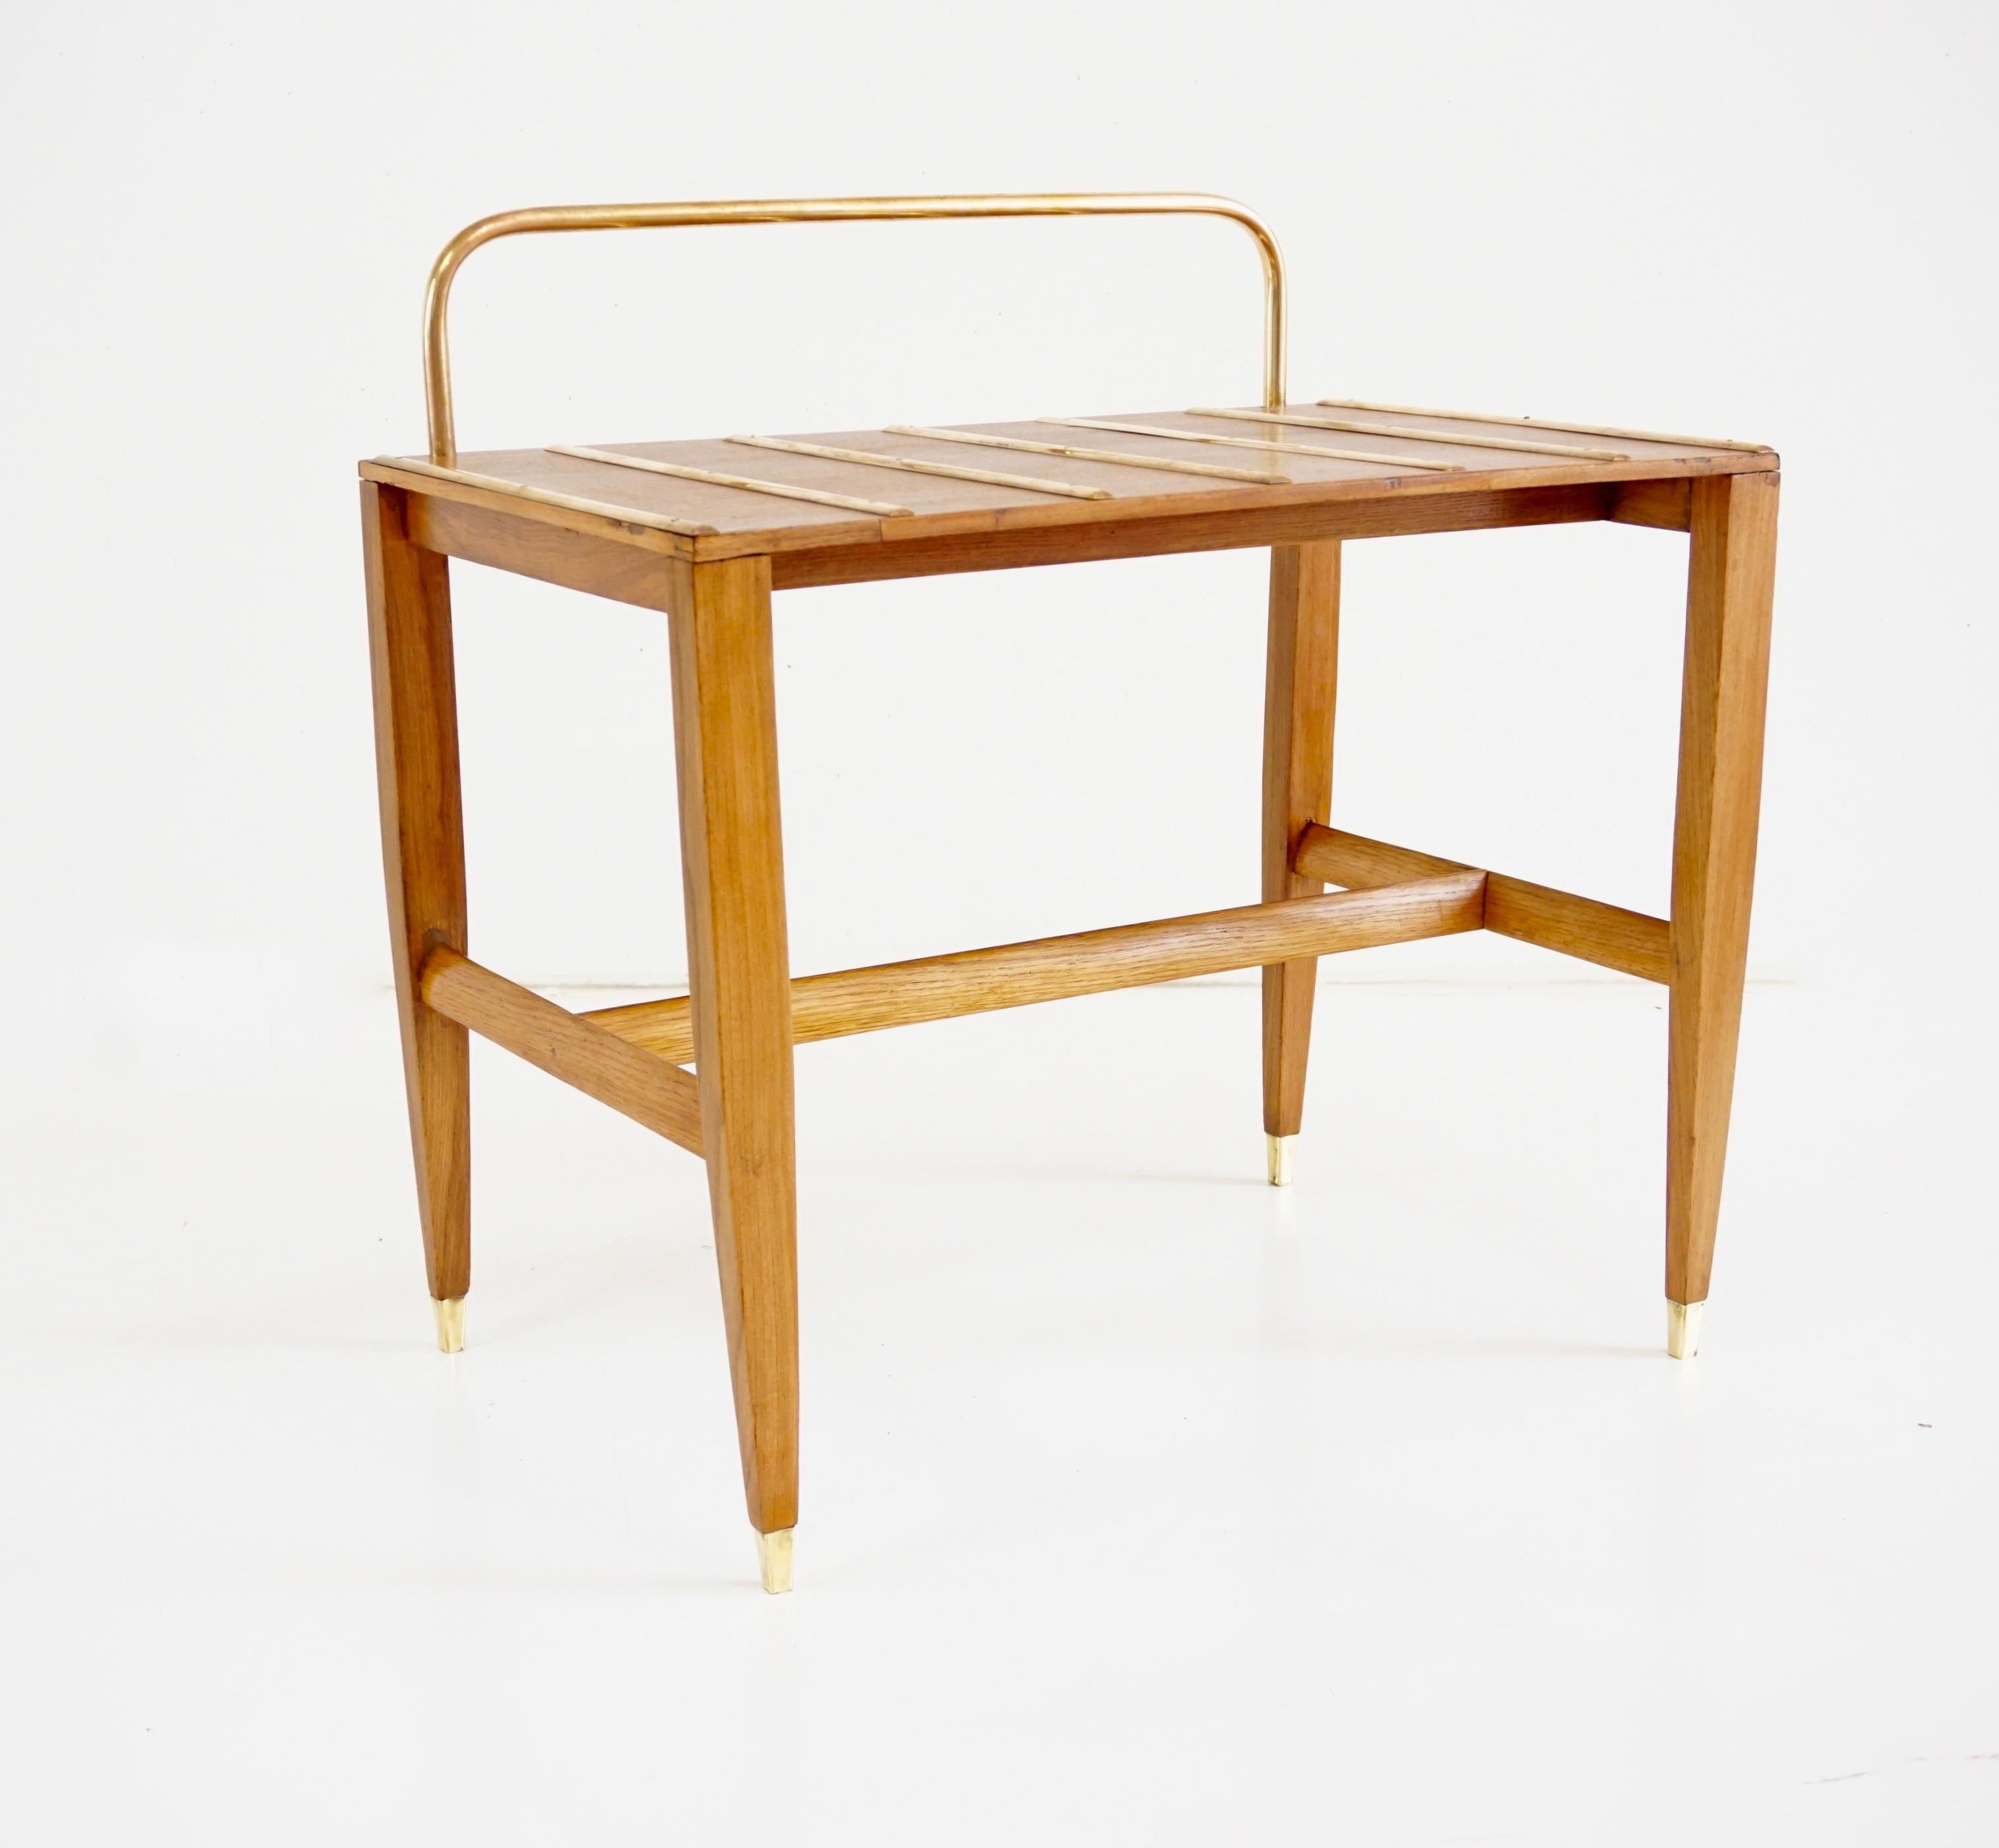 Mid-Century Modern Gio Ponti Walnut Side Table, Luggage Rack for Hotel Royal Naples, 1955 For Sale